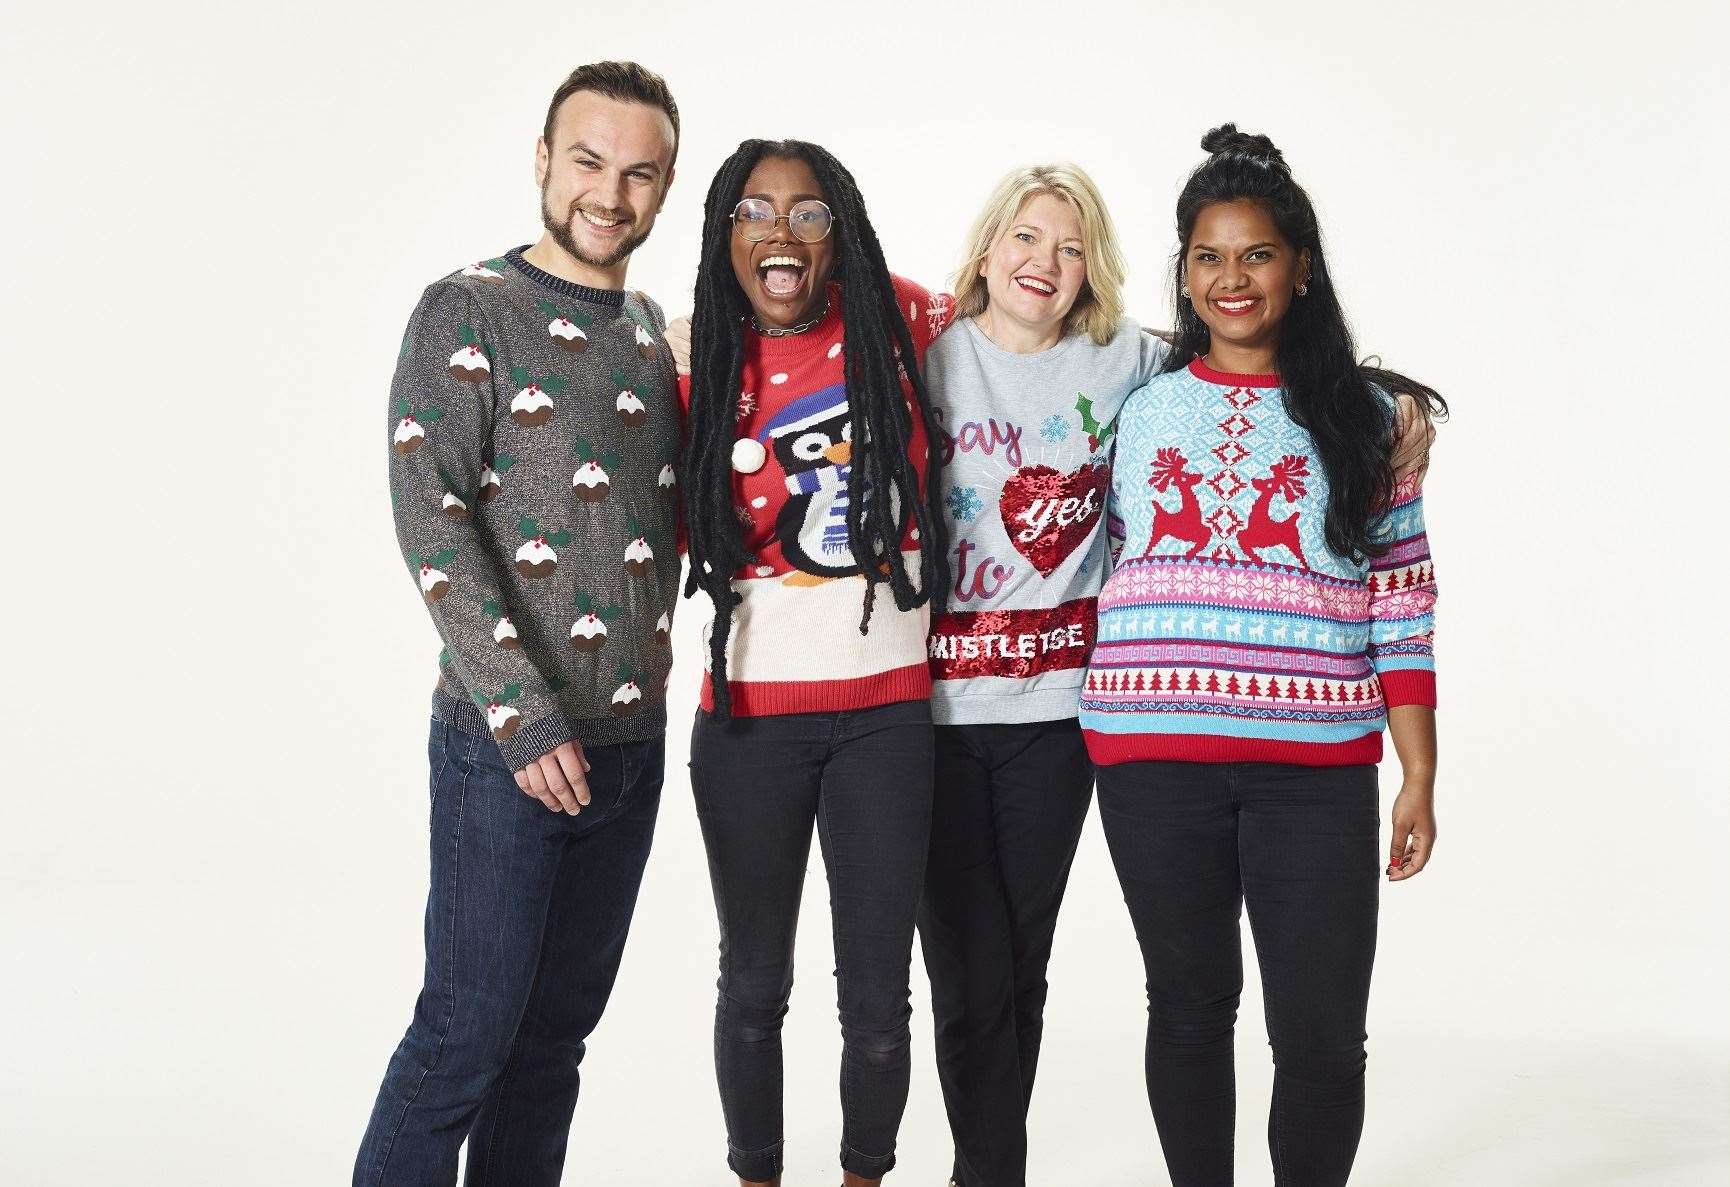 Why not join in Christmas Jumper Day?